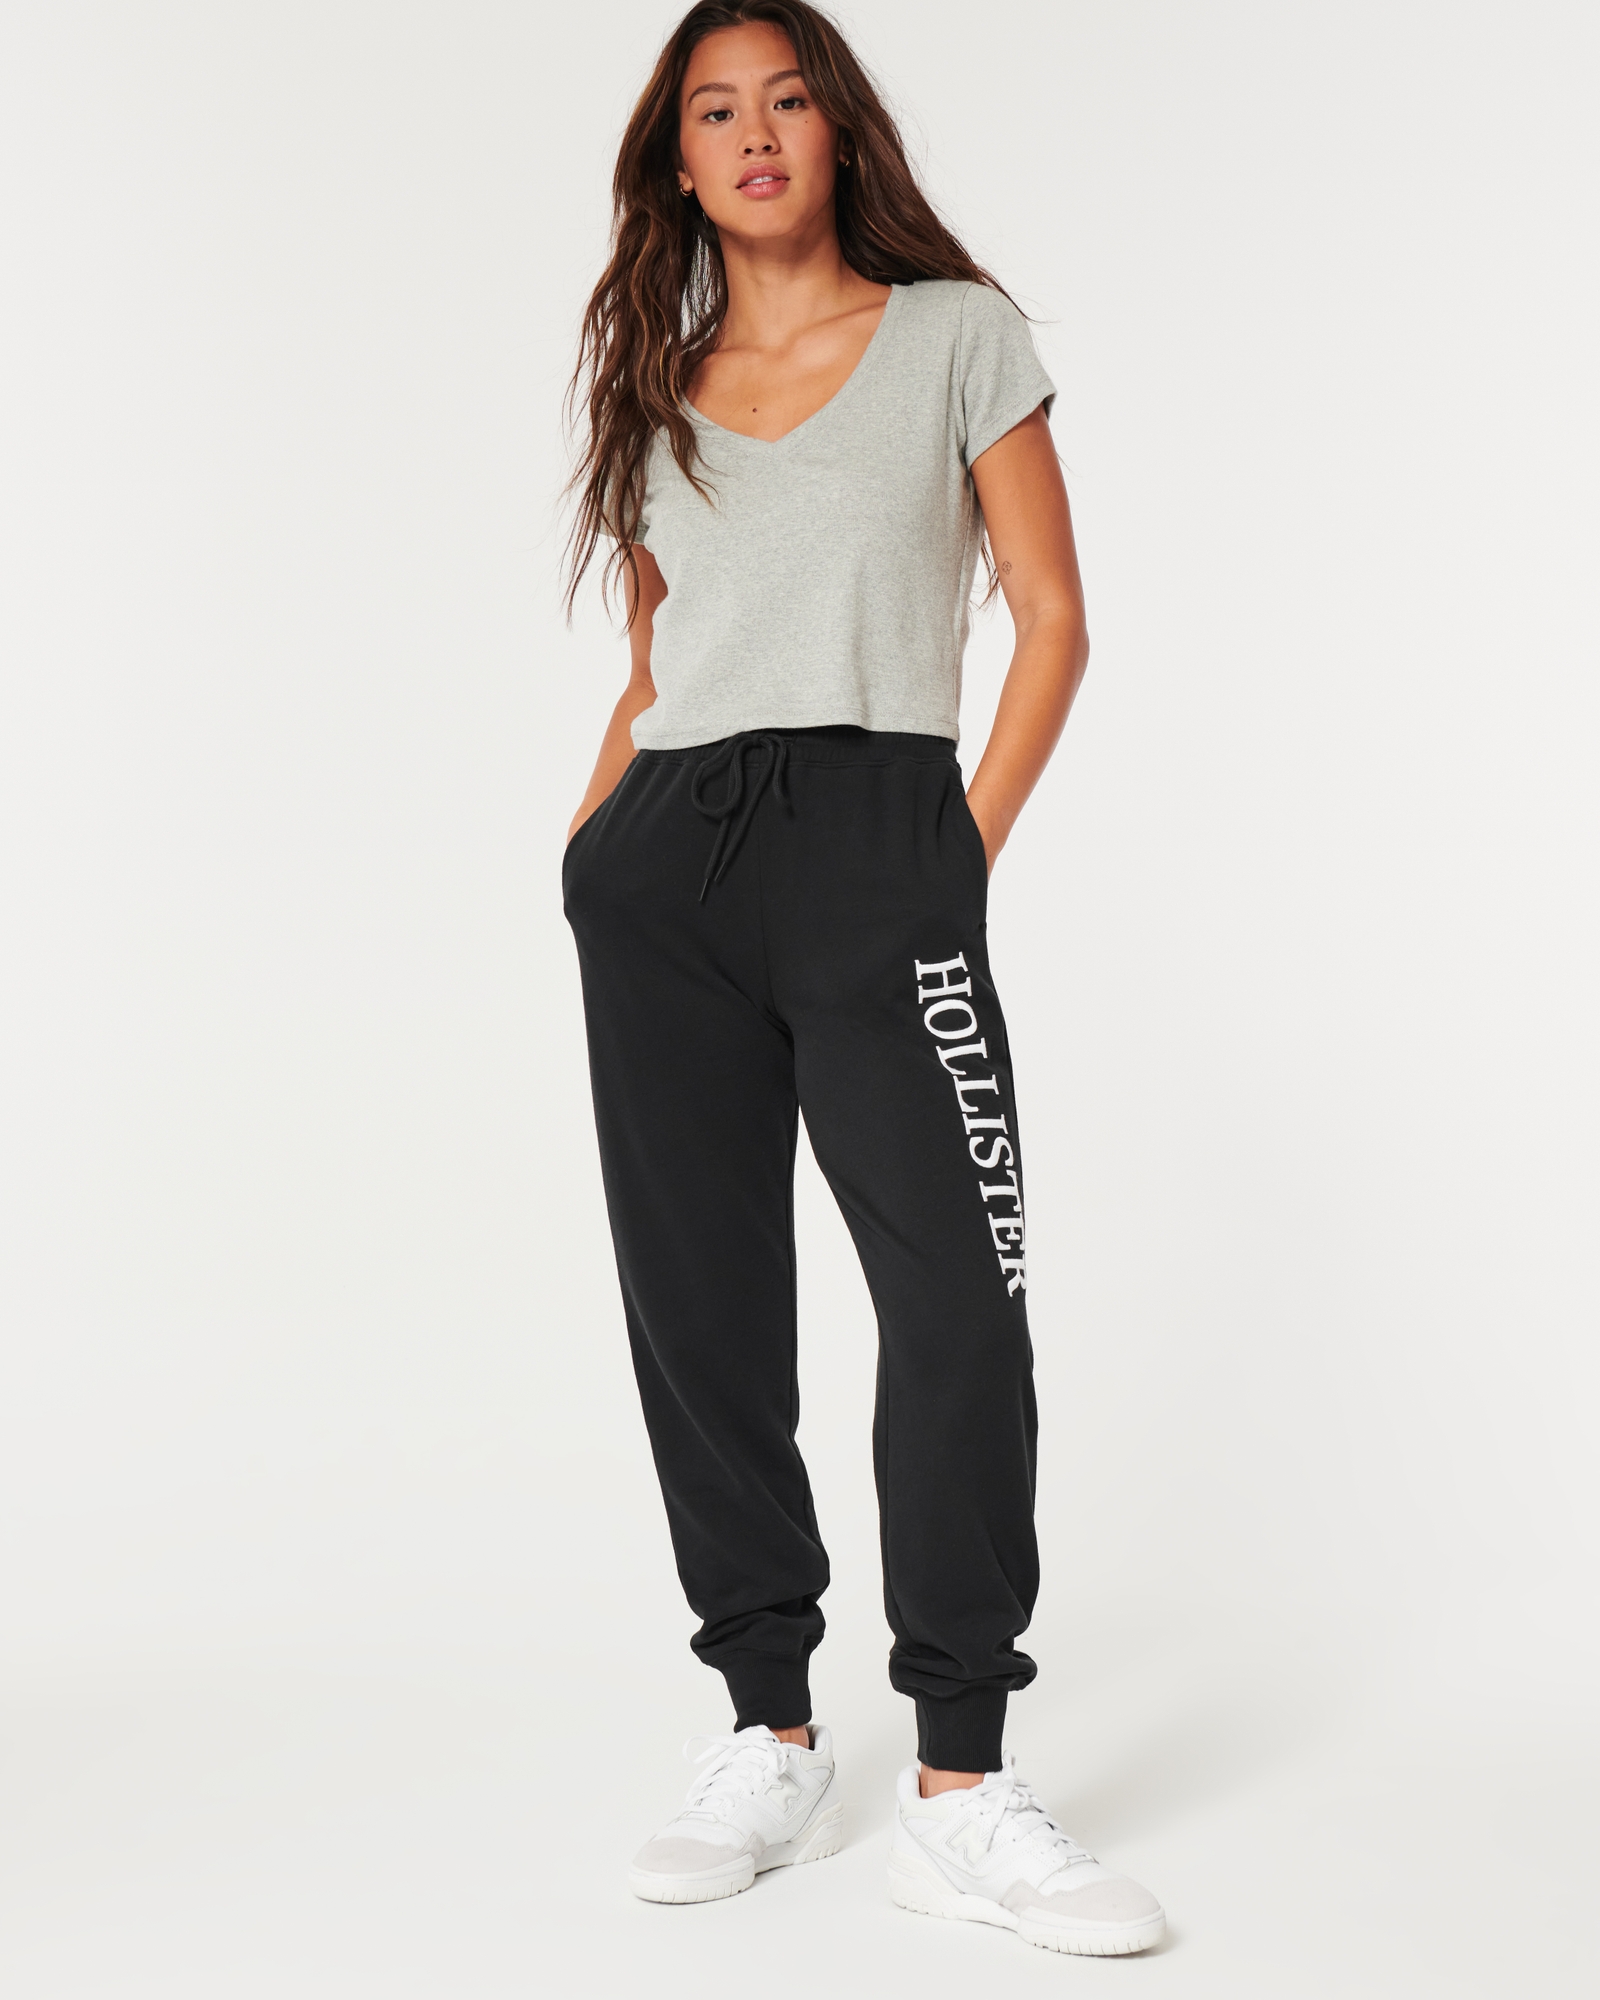 New Hollister High Waisted Joggers  Women jogger pants, Fashion pants,  Cute casual outfits